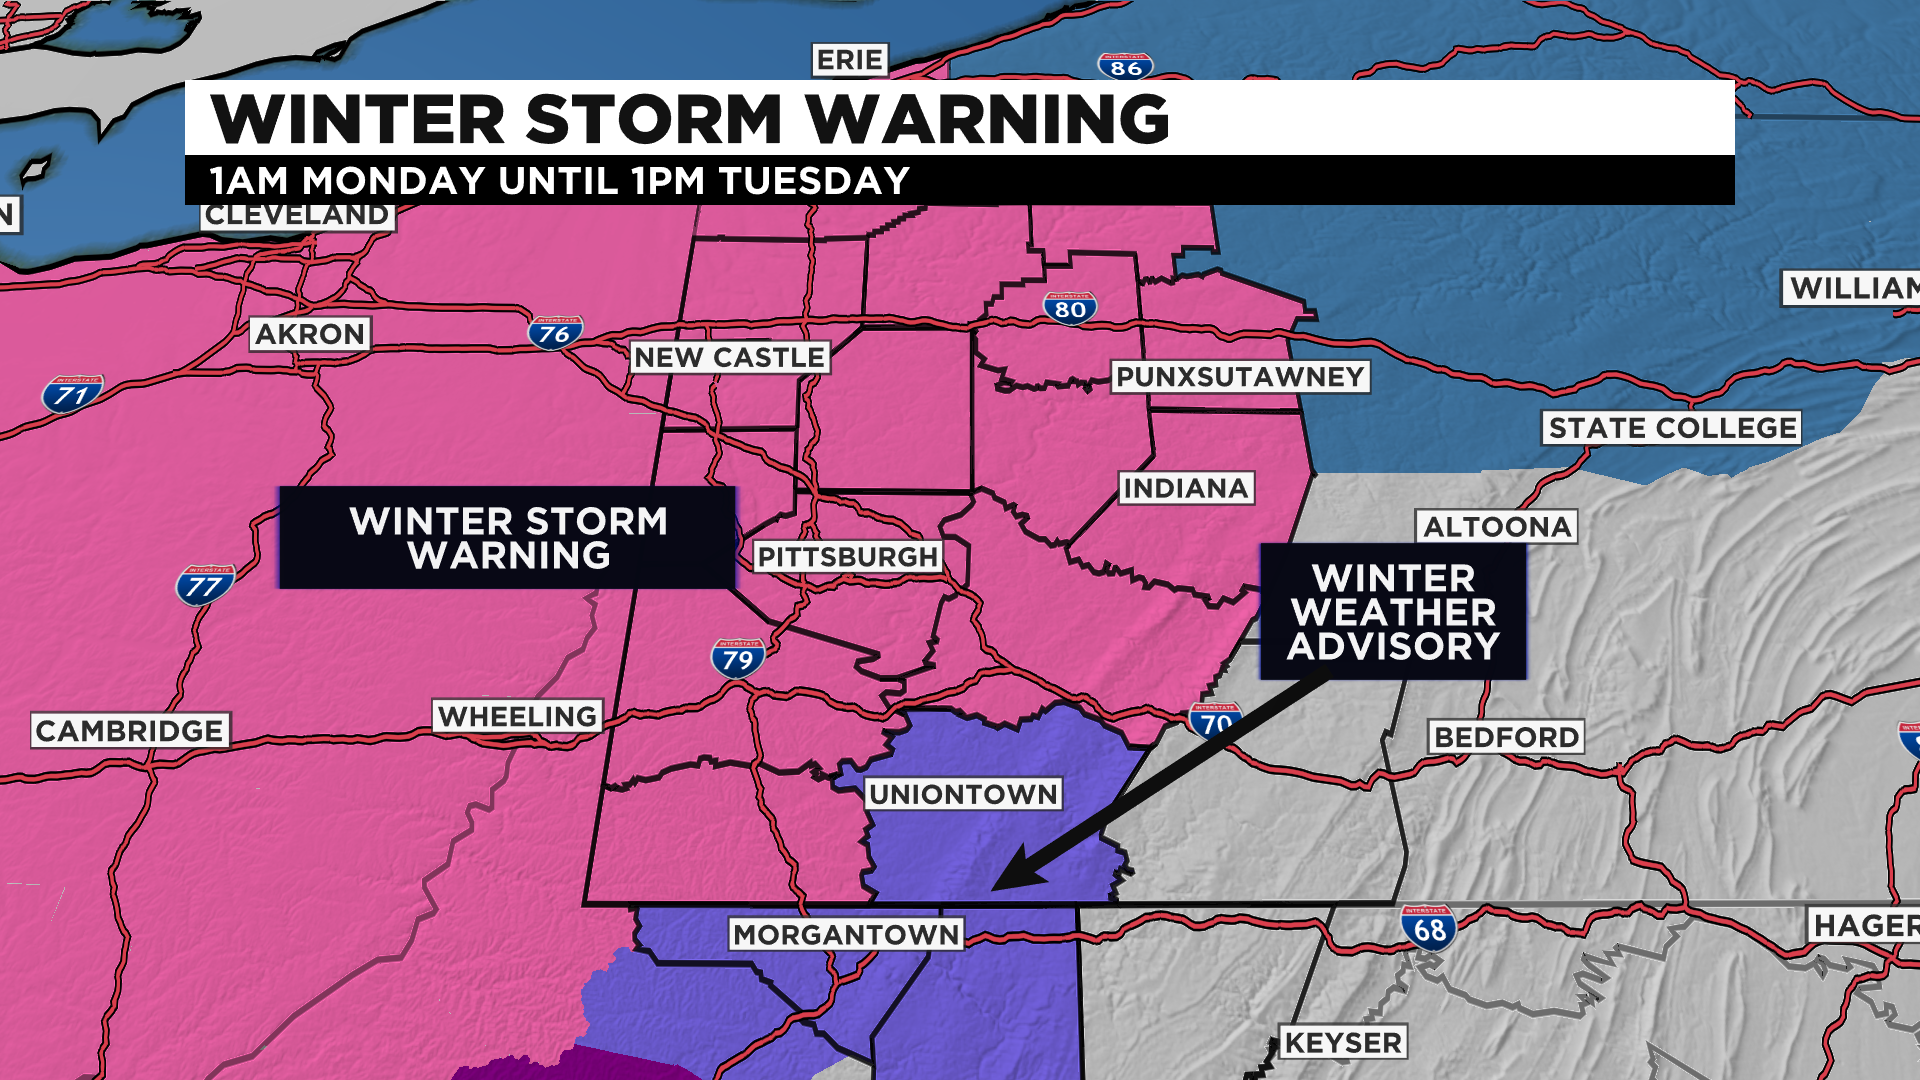 Winter Storm Warning Issued For Pittsburgh Area Ahead Of Expected Major